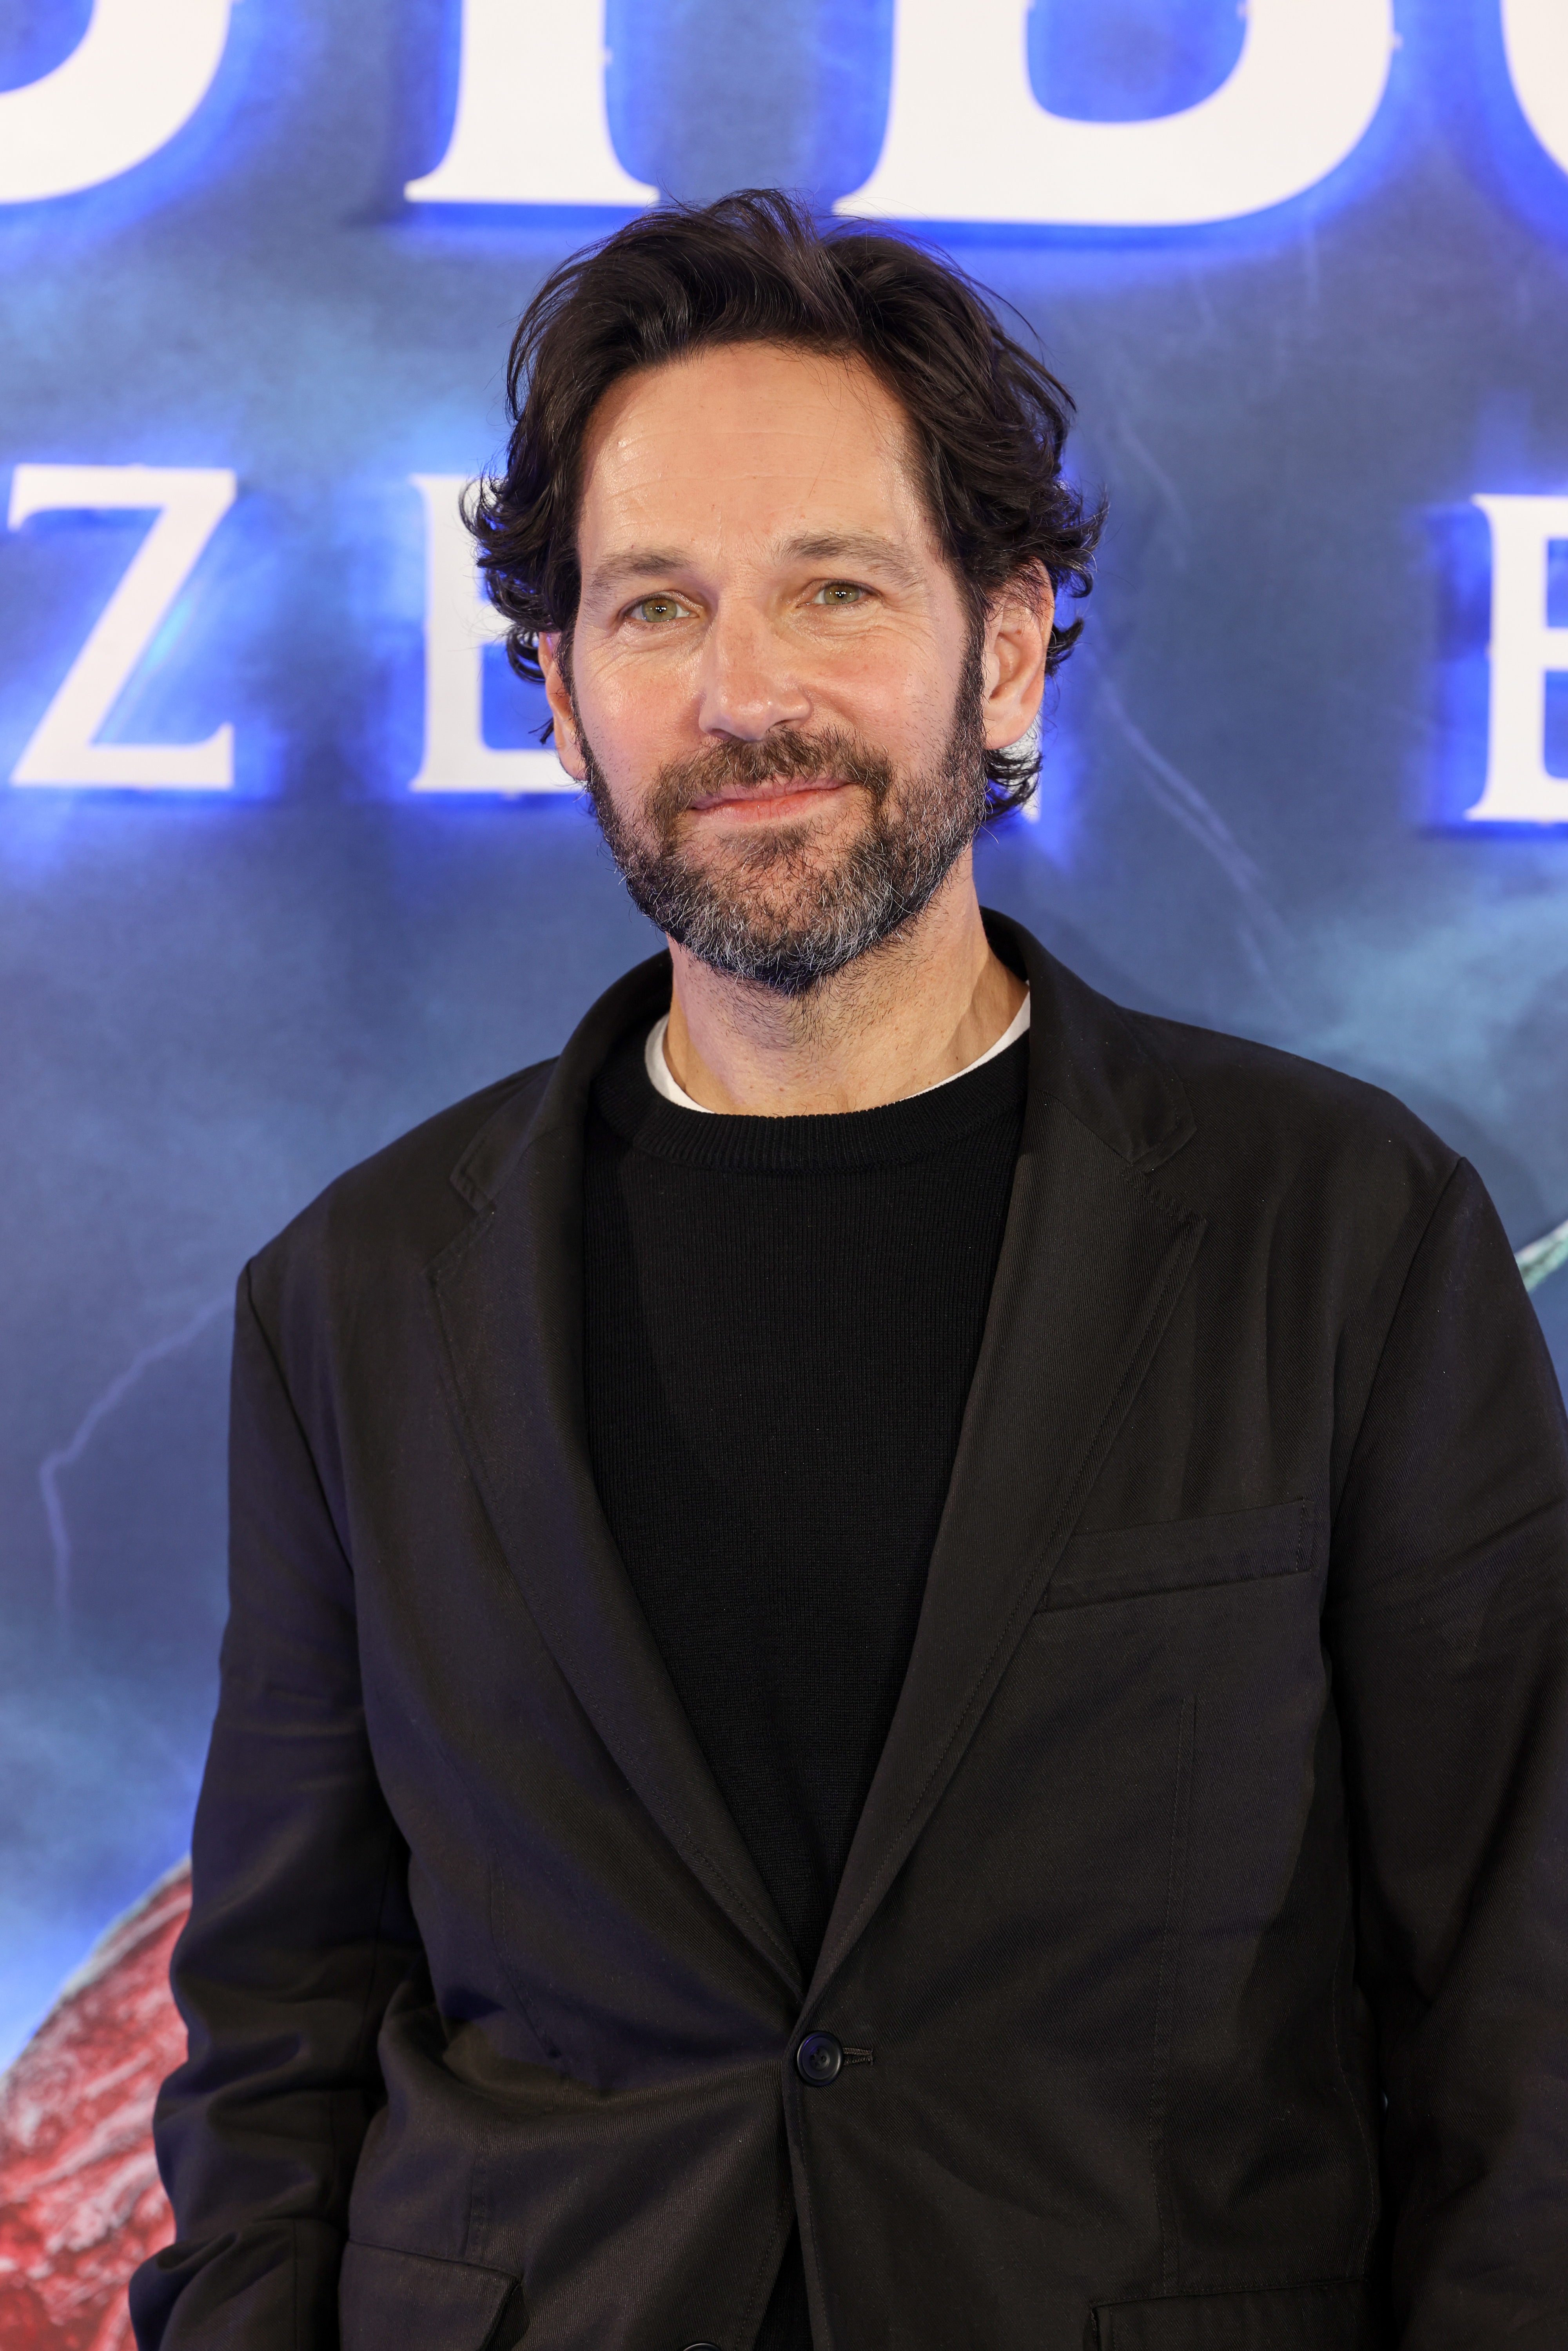 Paul Rudd in a black suit stands smiling at a &quot;Ant-Man and the Wasp: Quantumania&quot; event